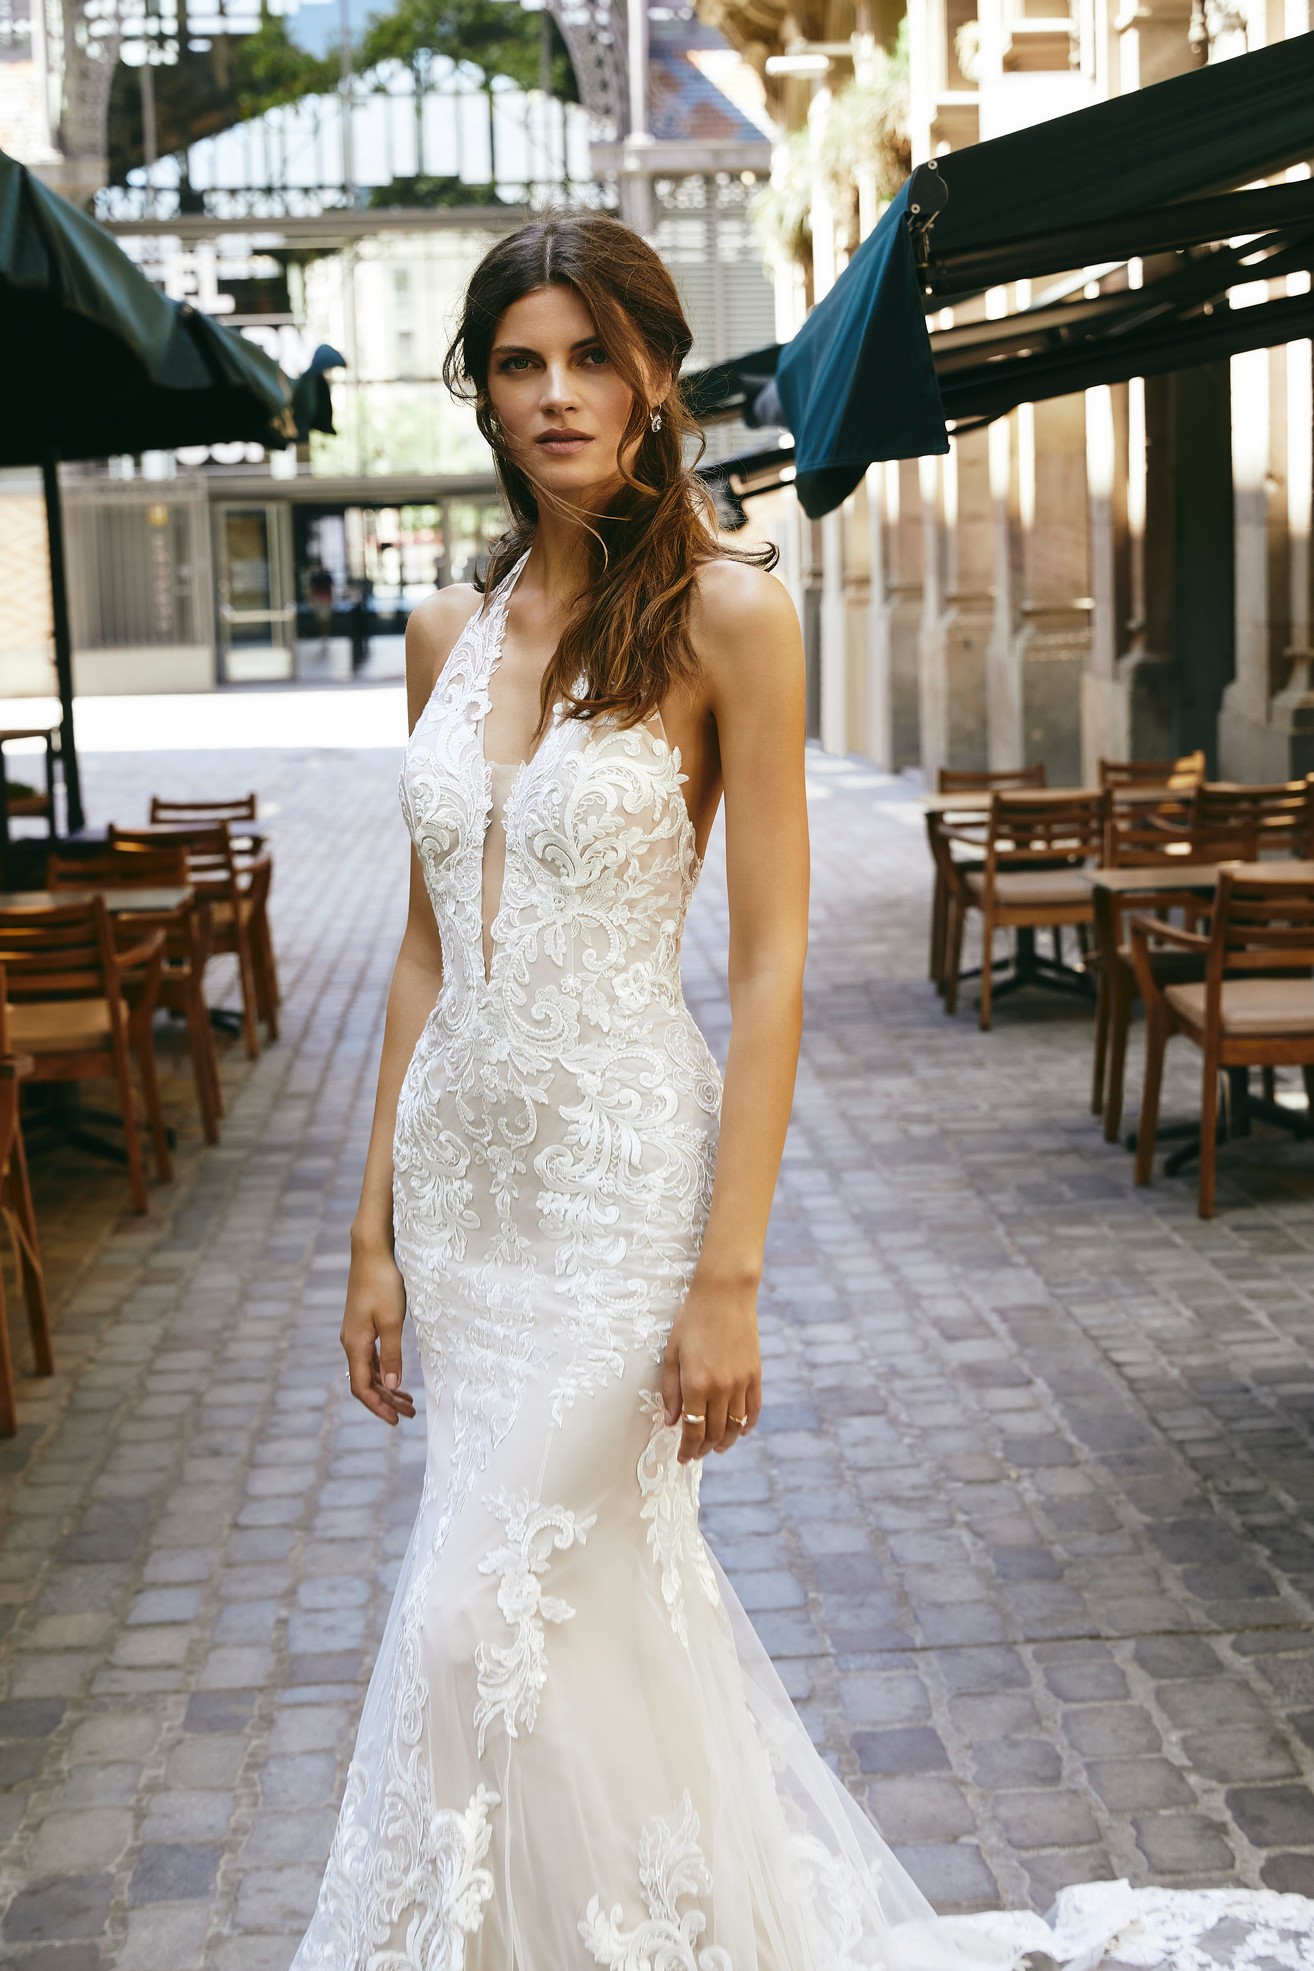 Woman standing in street between parasols wearing lace and tulle fit and flare wedding dress with lace applique detail